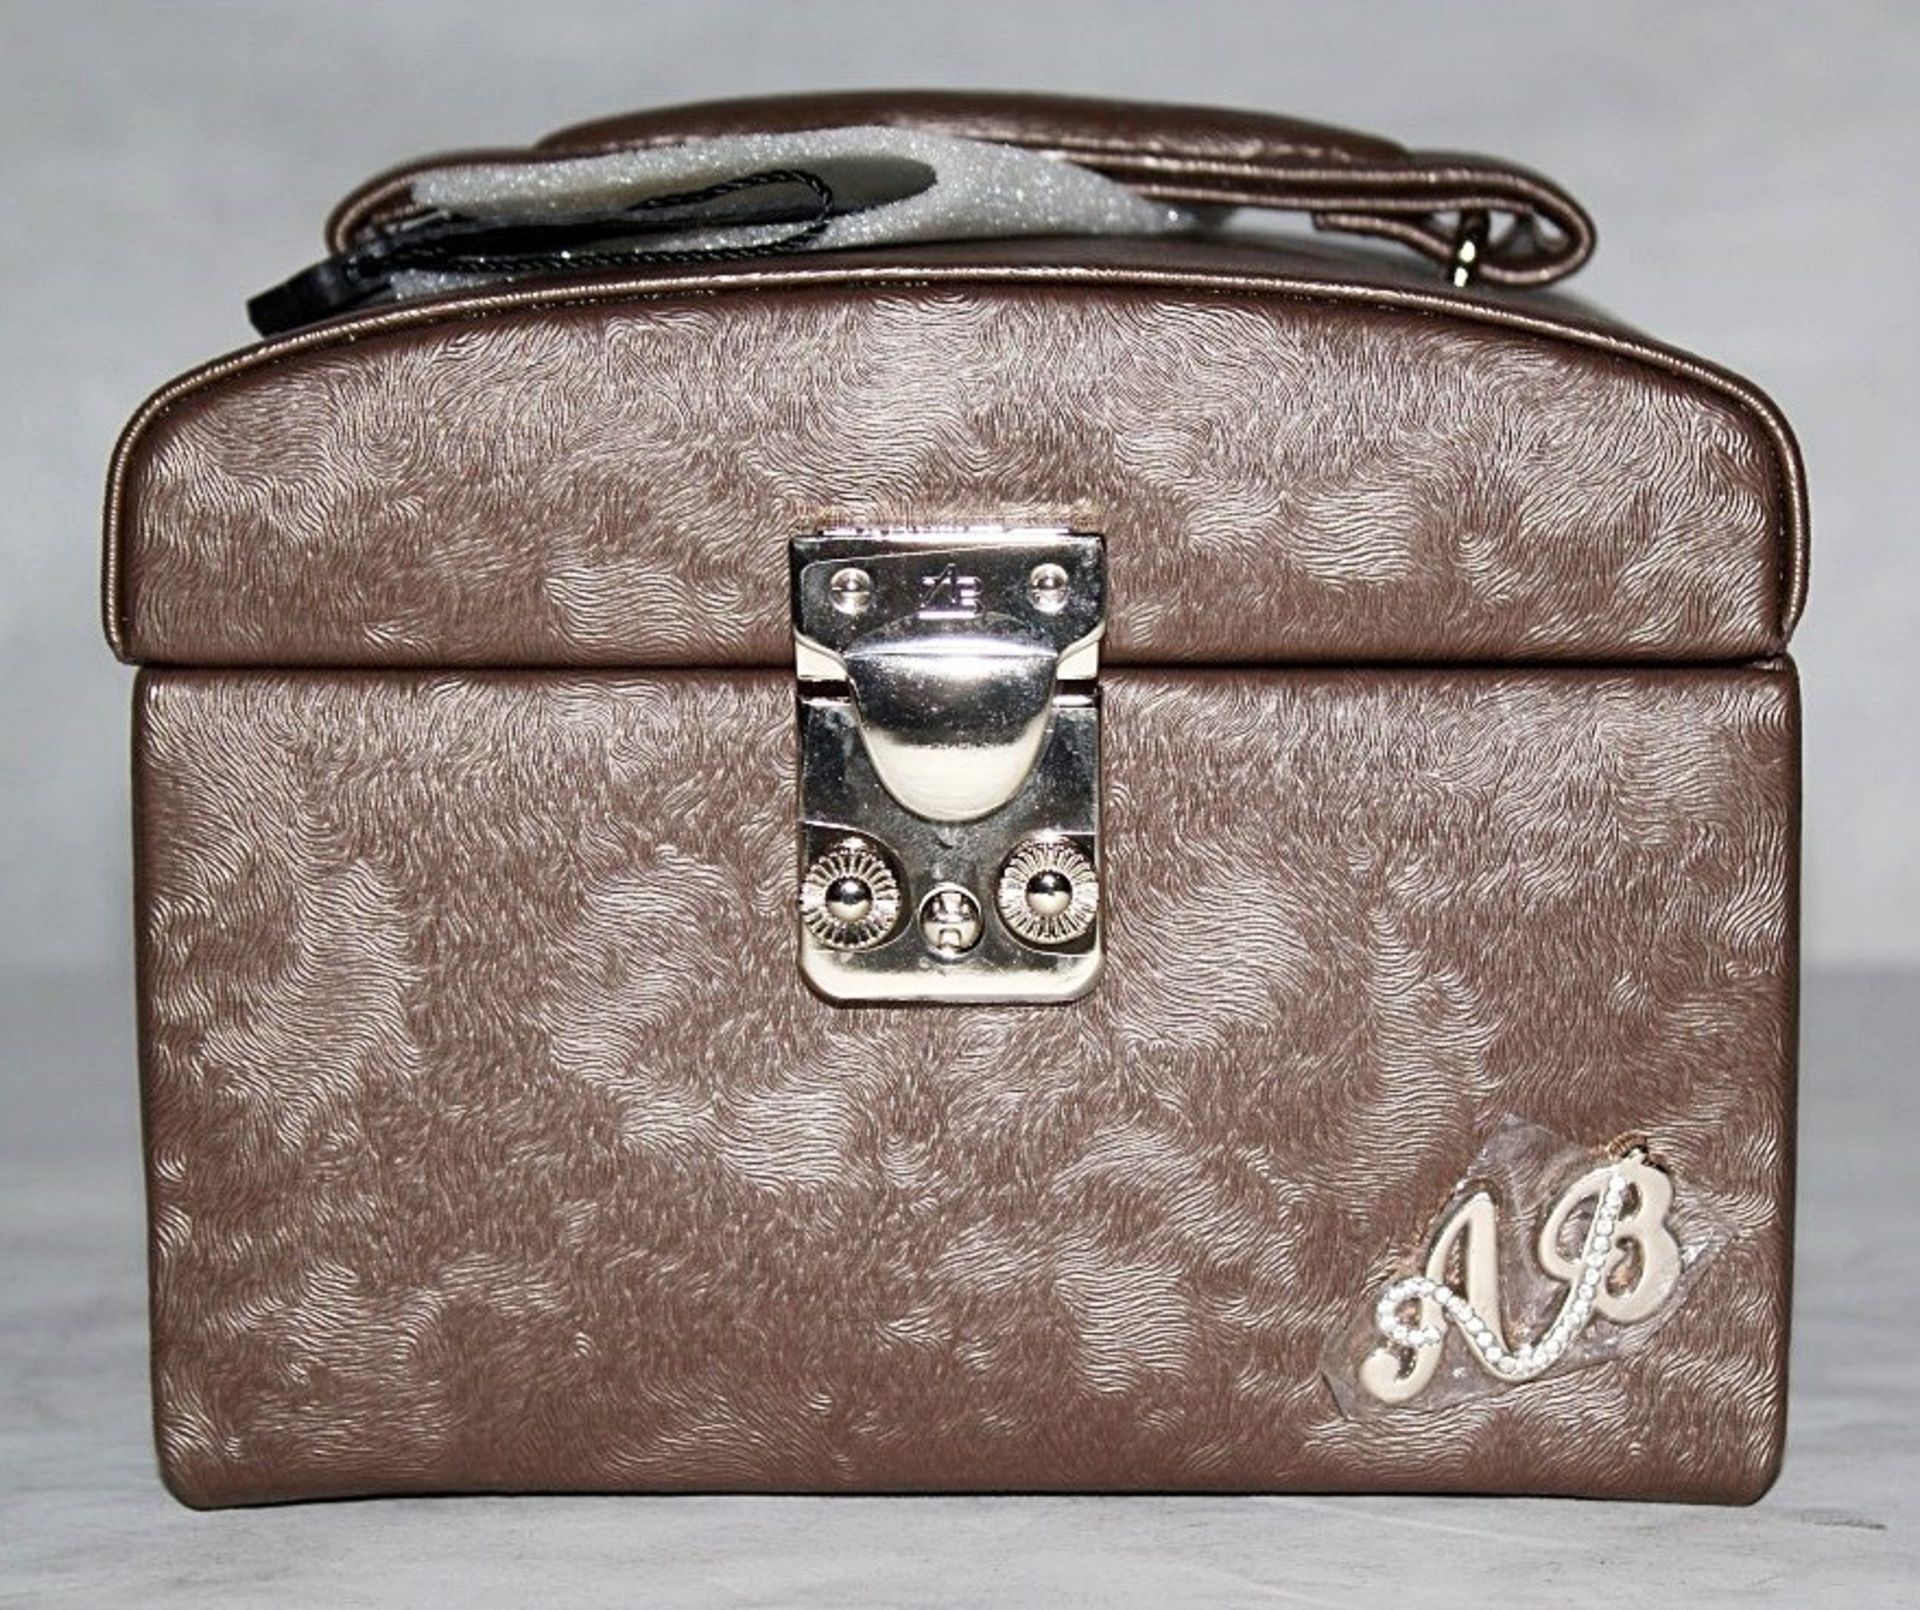 1 x "AB Collezioni" Italian Luxury Jewellery Case (33548) - Ref LT158 – Features Top & Pull-Out - Image 3 of 4